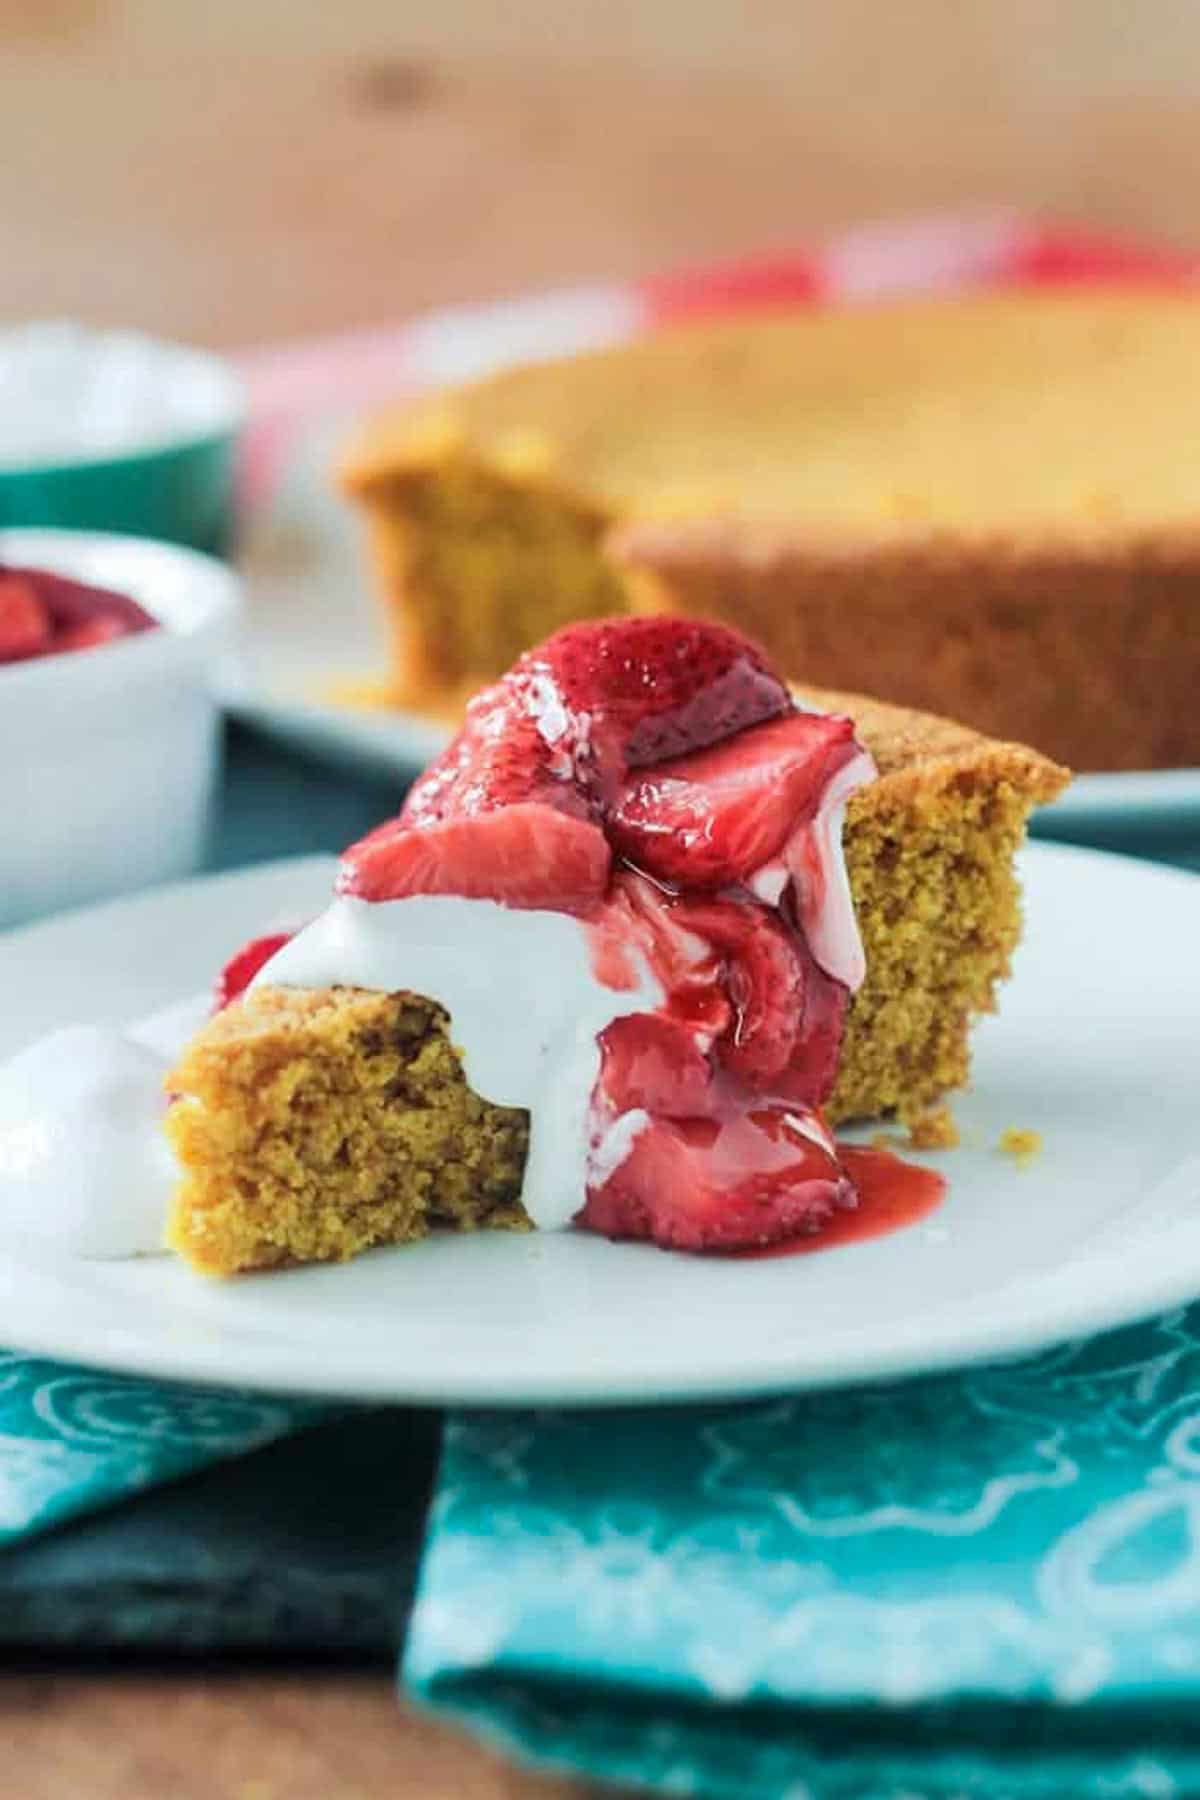 Vanilla cornbread cake topped with strawberries and whipped cream.